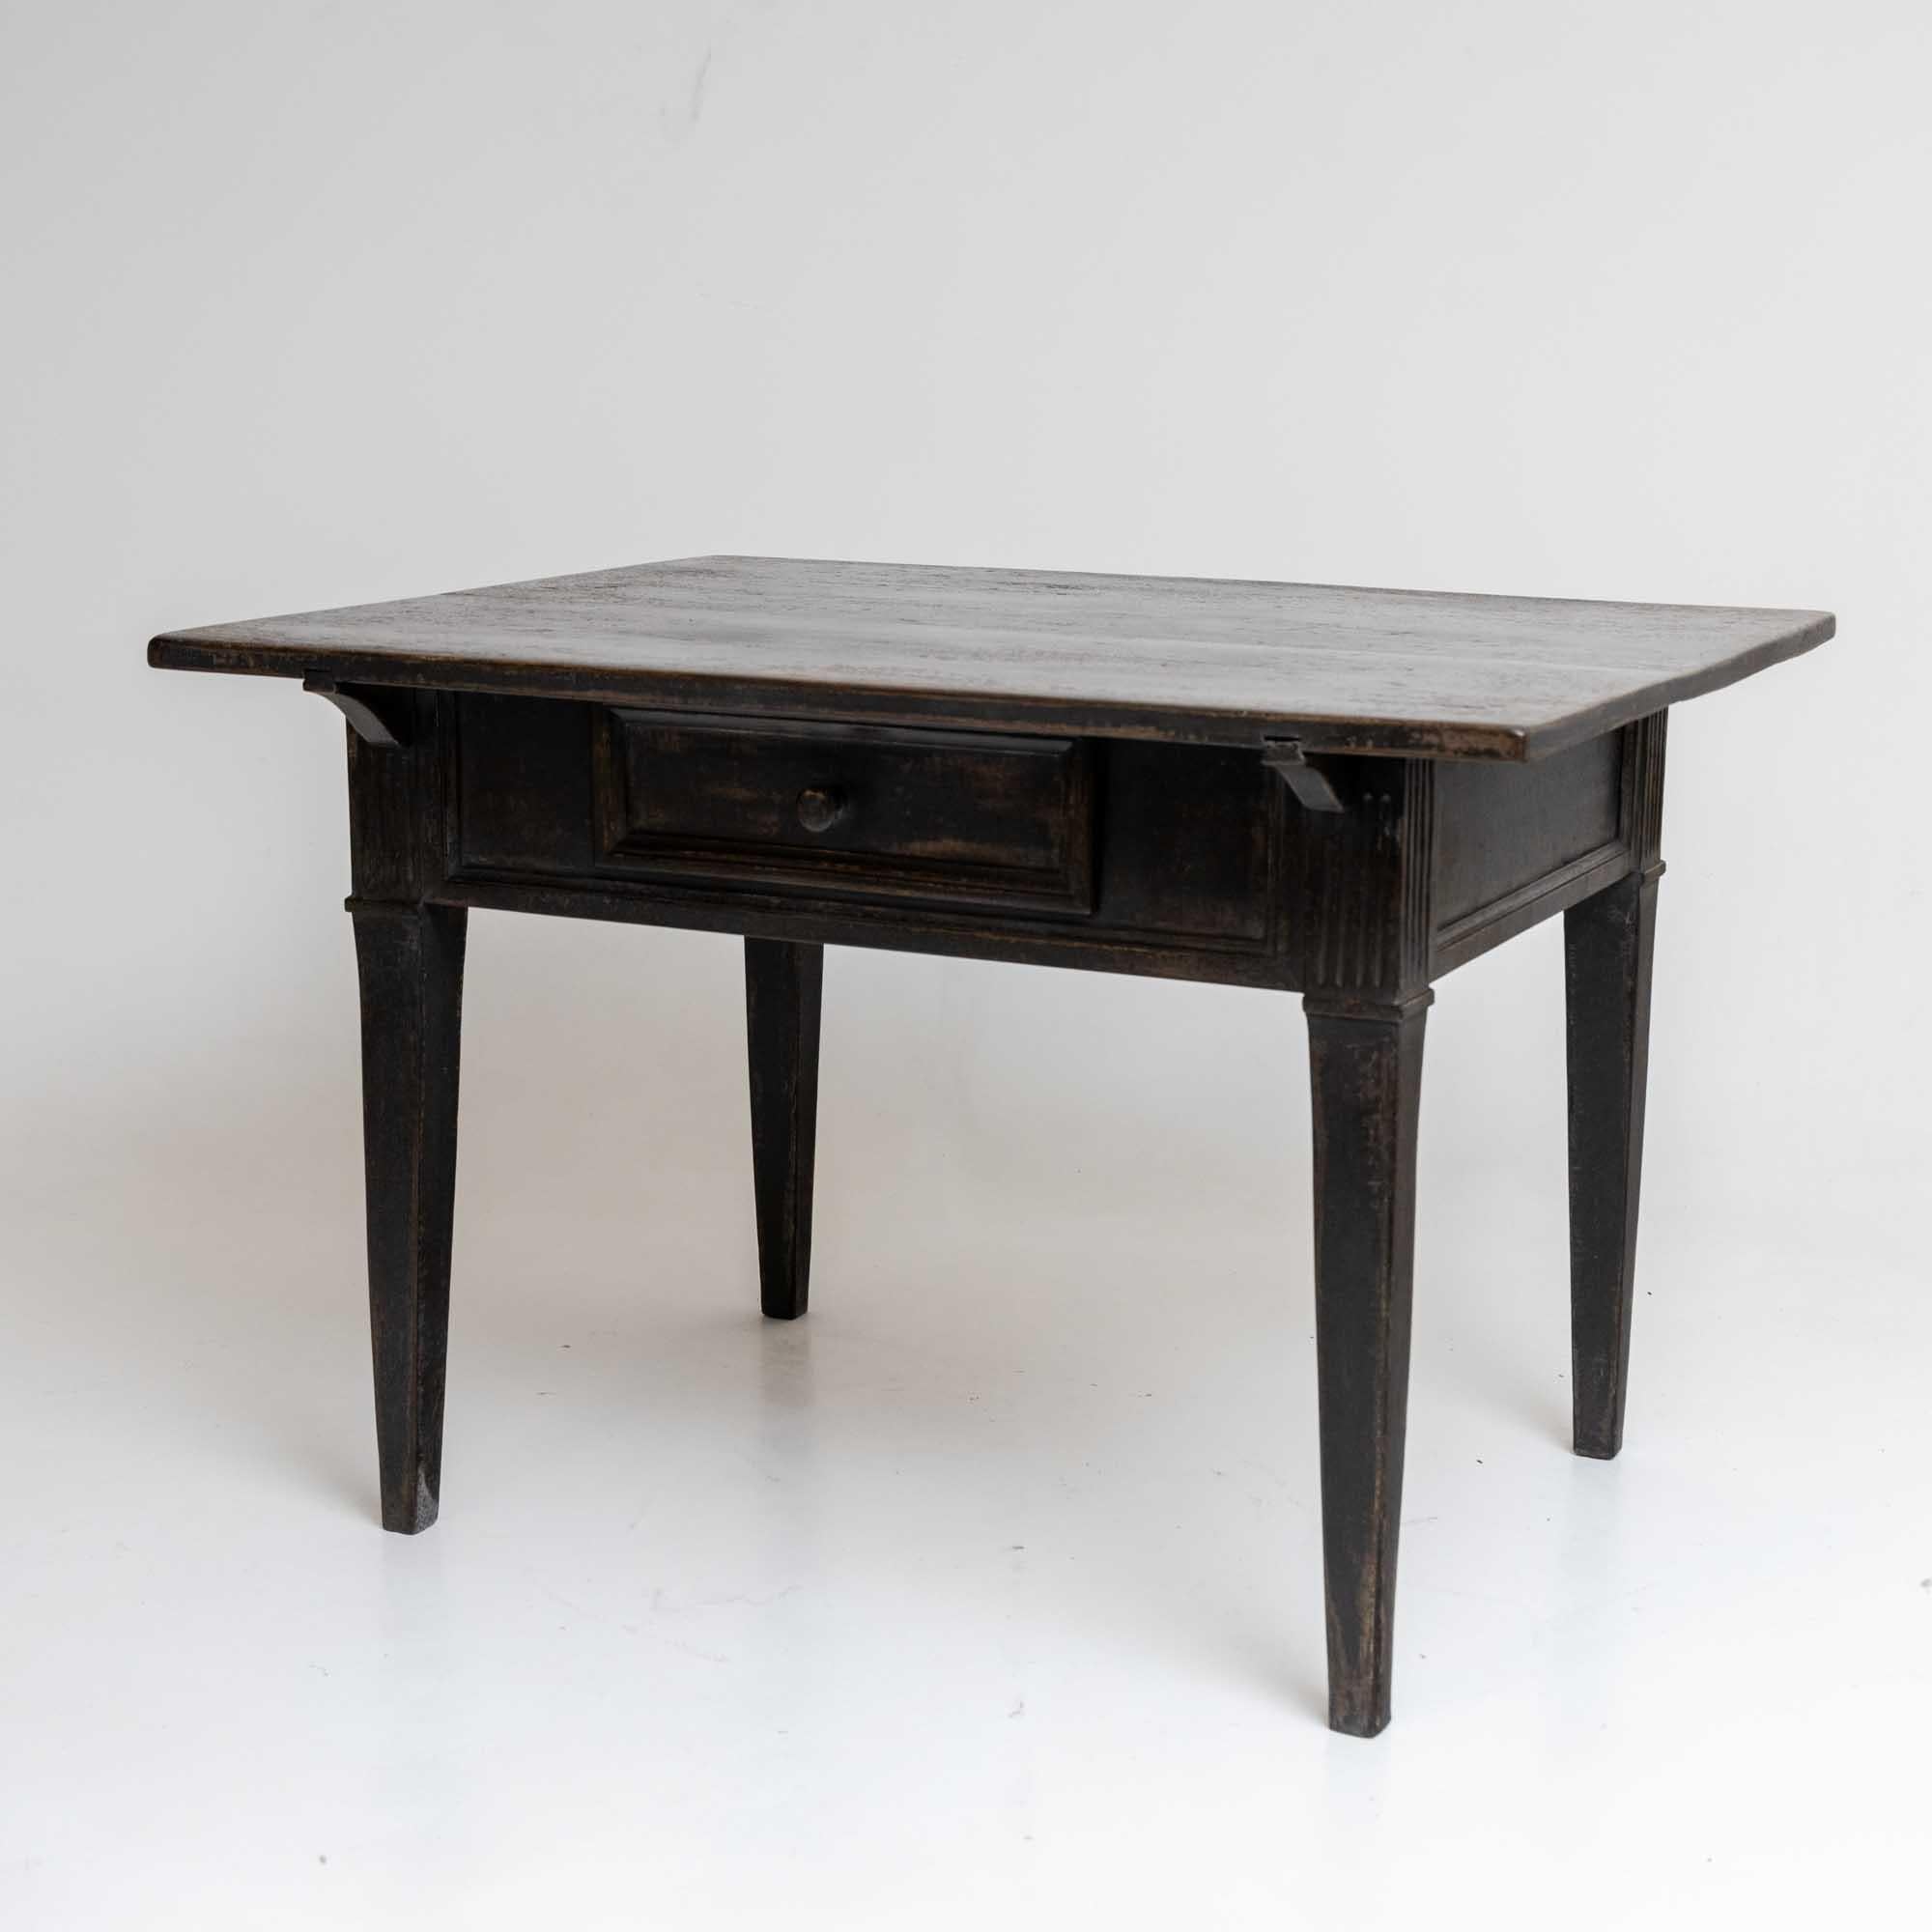 Rustic dining table with one drawer and rectangular table top. The table stands on tapered legs with fluted decorations on the frame. The dark gray dining table has been repainted and given an antique patina.